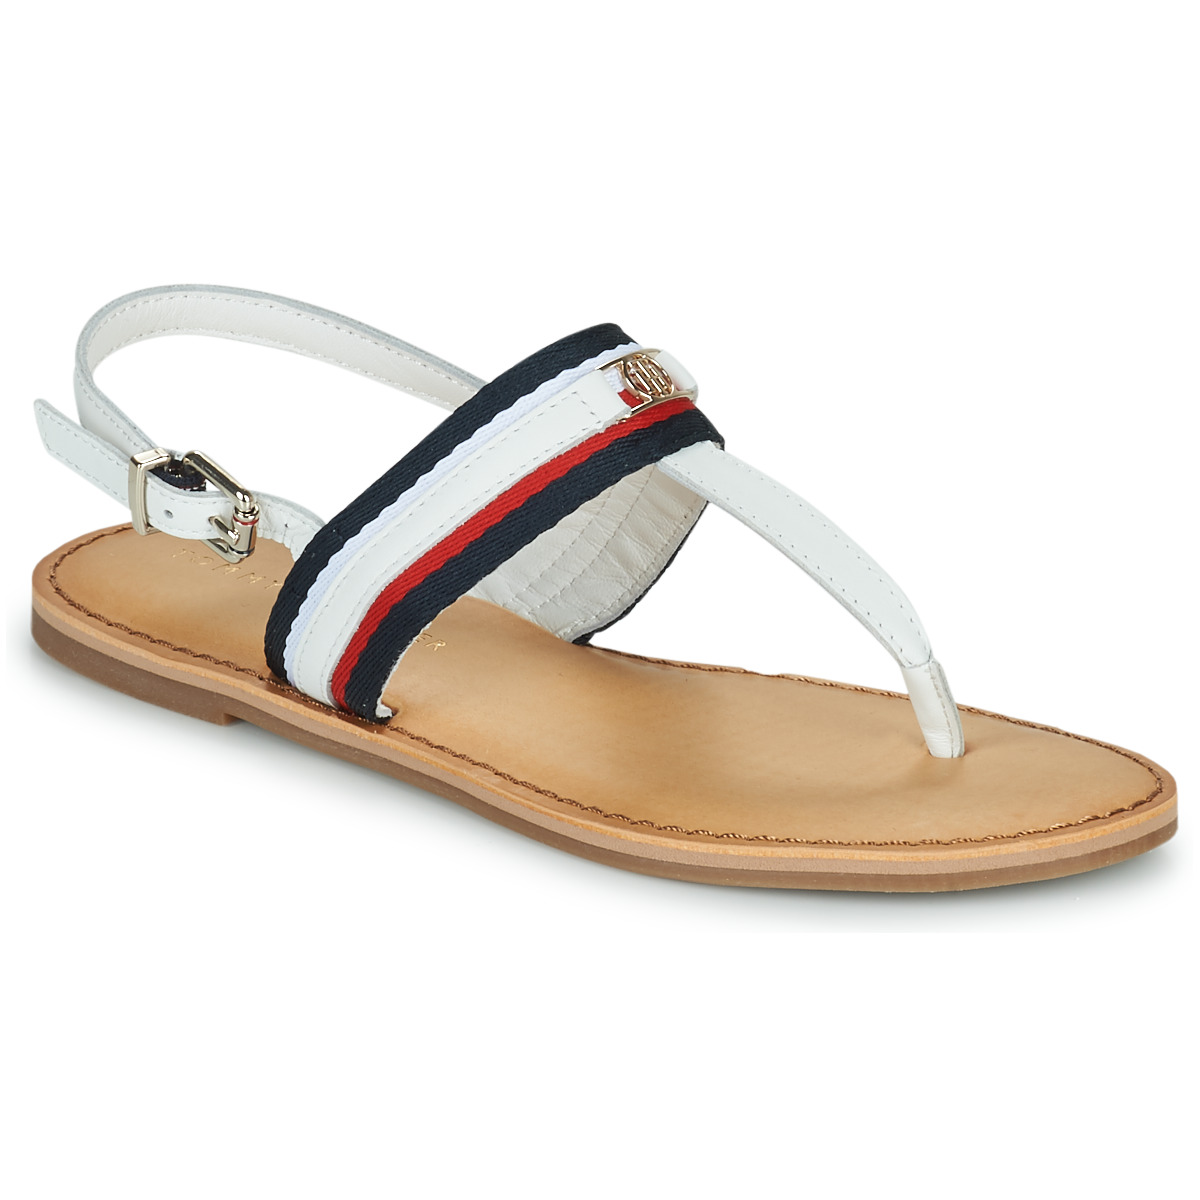 Sapatos Mulher Trainers 38p Tommy HILFIGER Low Cut Lace-Up Sneaker T3A4-32149-0315 M Power Pink 305 CORPORATE WEBBING FLAT SANDAL 38p Tommy Jeans Unlined Womens Bralette